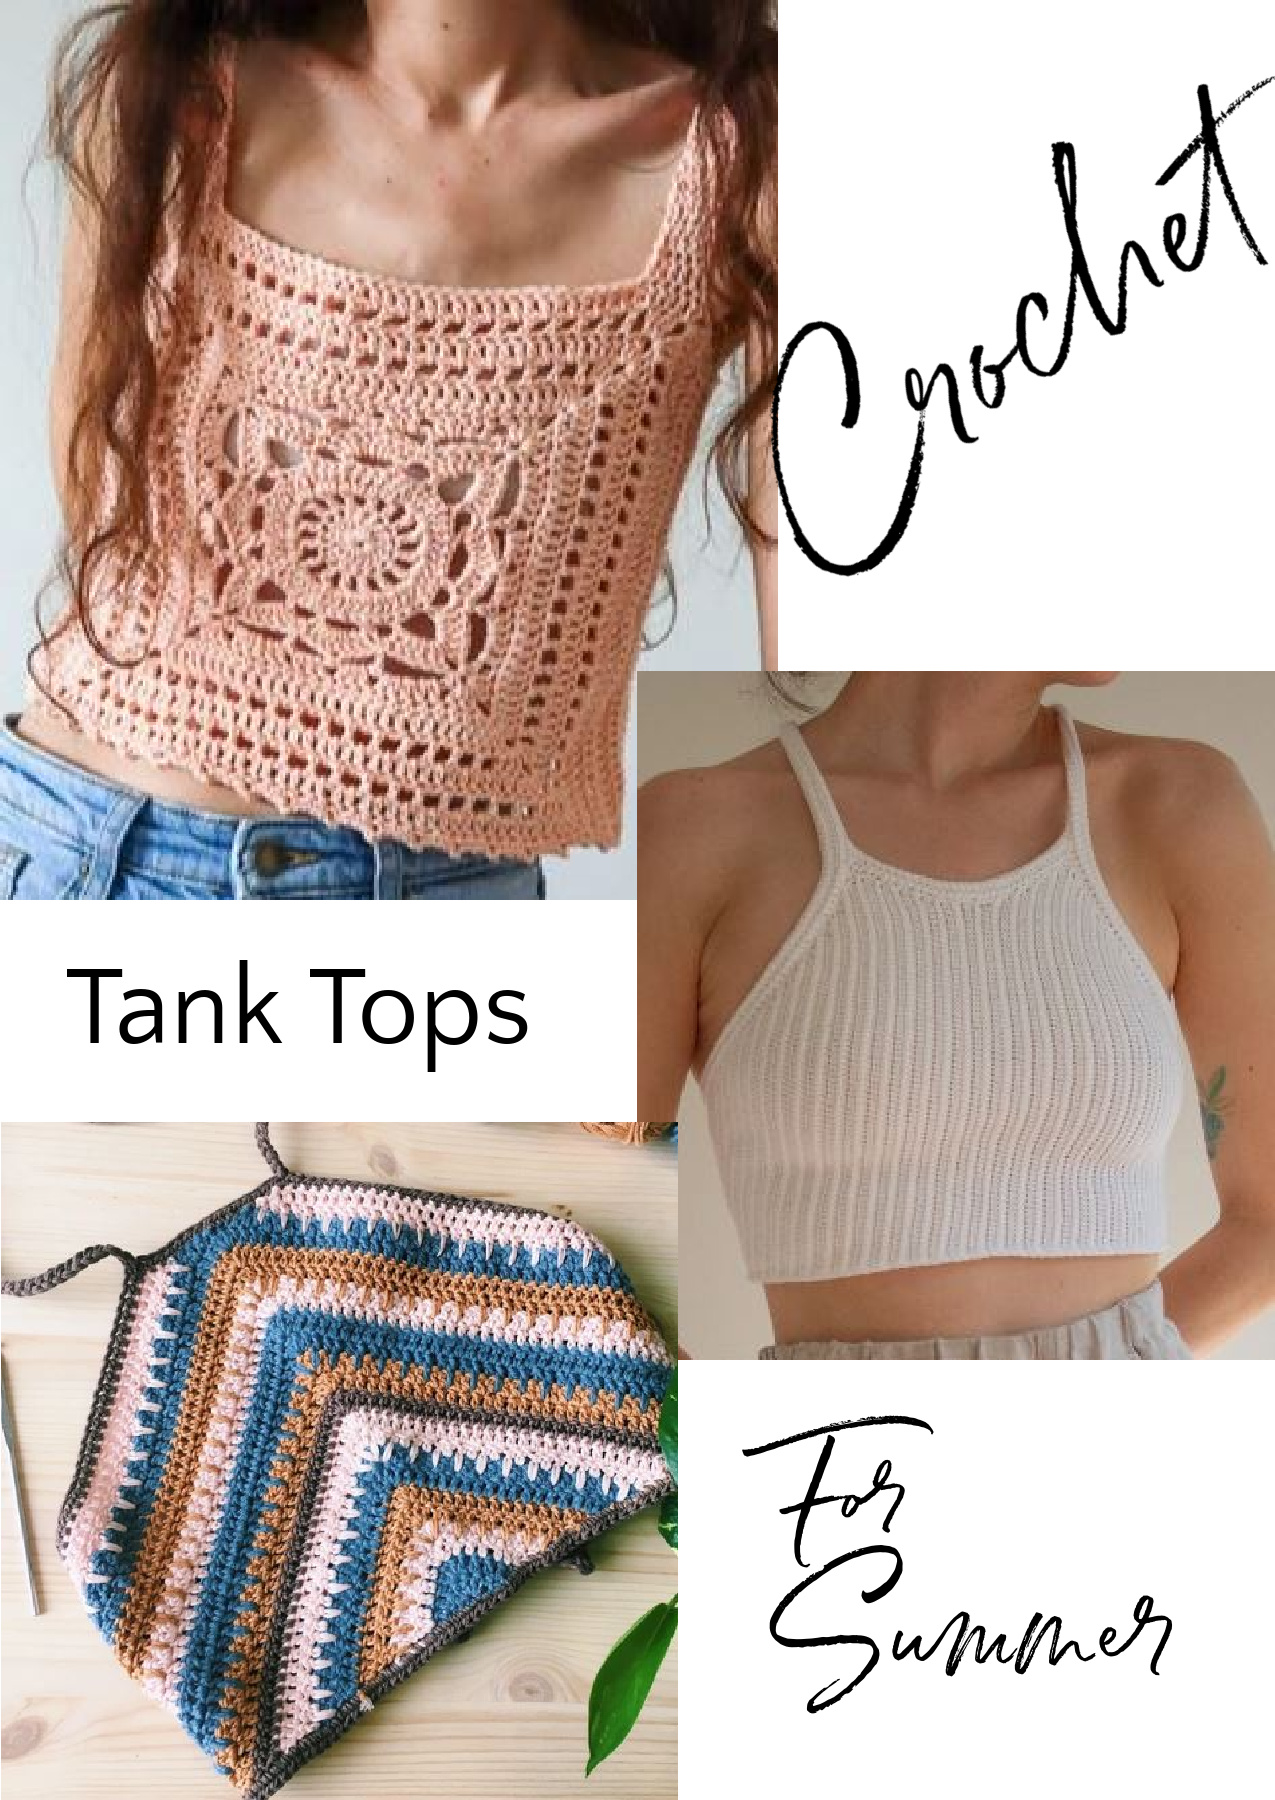 3 crochet tank tops on white background with text 'crochet tank tops for summer'. Top left peachy pink granny square style tank with blue jeans, middle right - white high neck crop crochet tank on tan torso, bottom left - 3 color stripe high neck crop tank top laying flat on a table (blue, cream, tan - Marly Bird